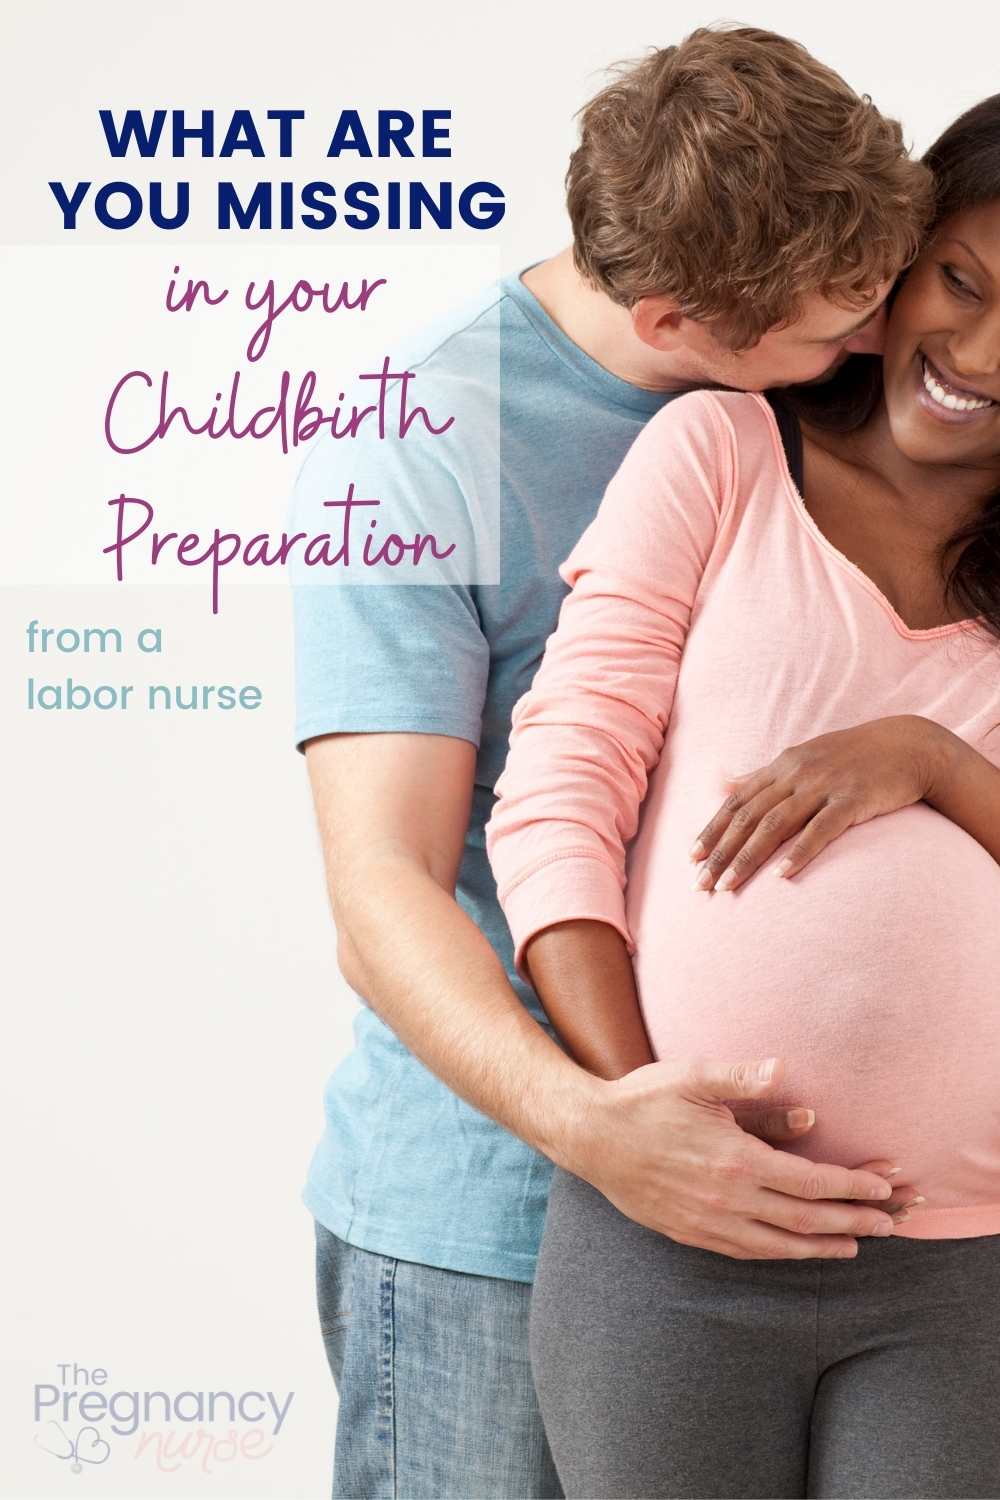 There are so many things to think about when preparing for childbirth. From relaxation techniques to pain relief options, it can be tough to know where to start. This guide will help you make the right decisions for you and your baby. Plus, learn about what to expect during labor and delivery.